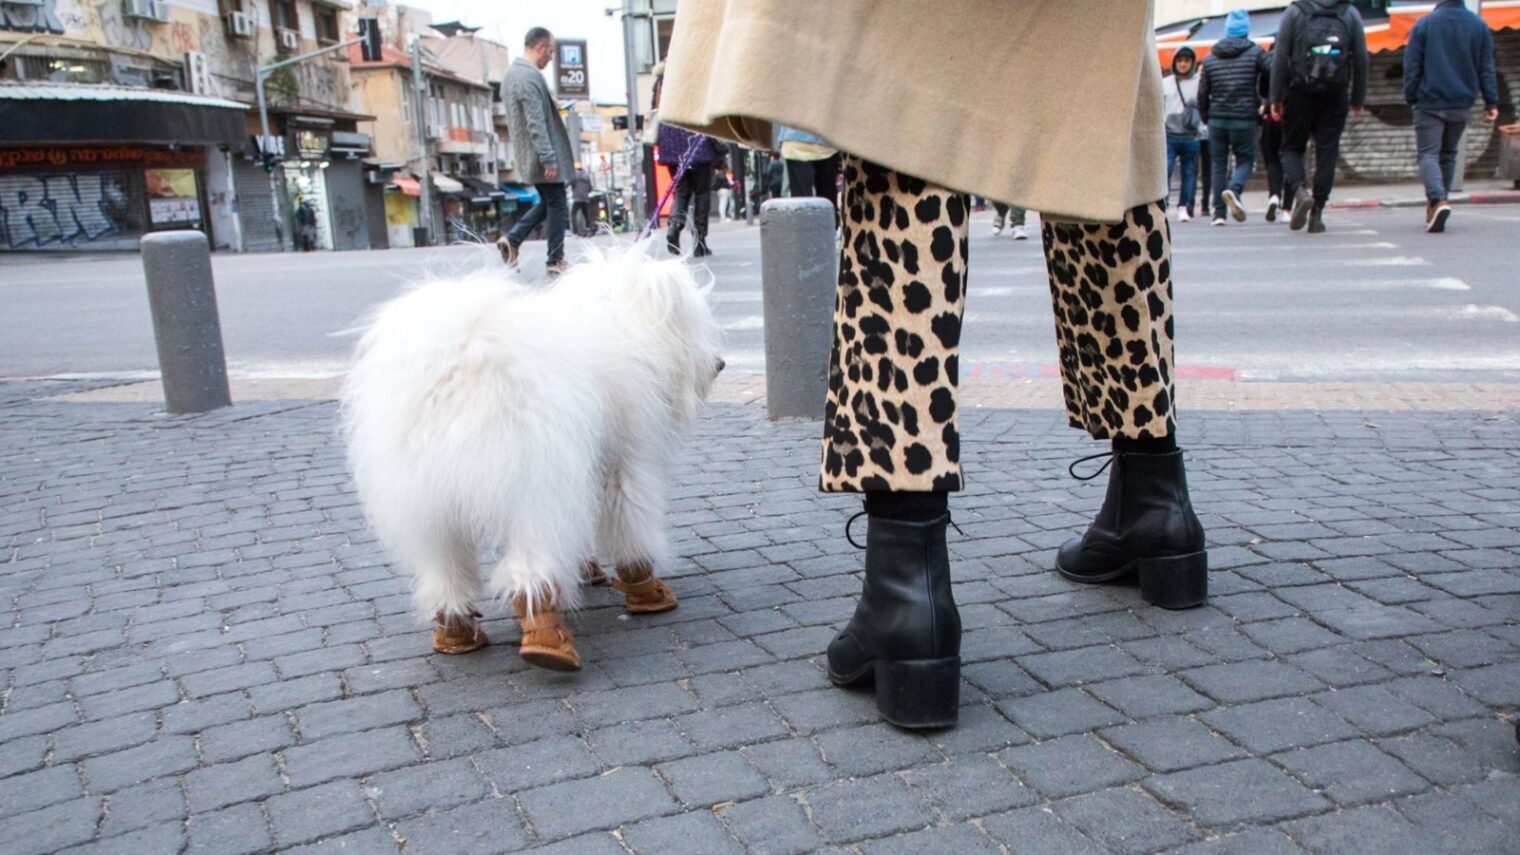 Boot-clad woman and dog in Tel Aviv. Photo by Evyatar Dayan